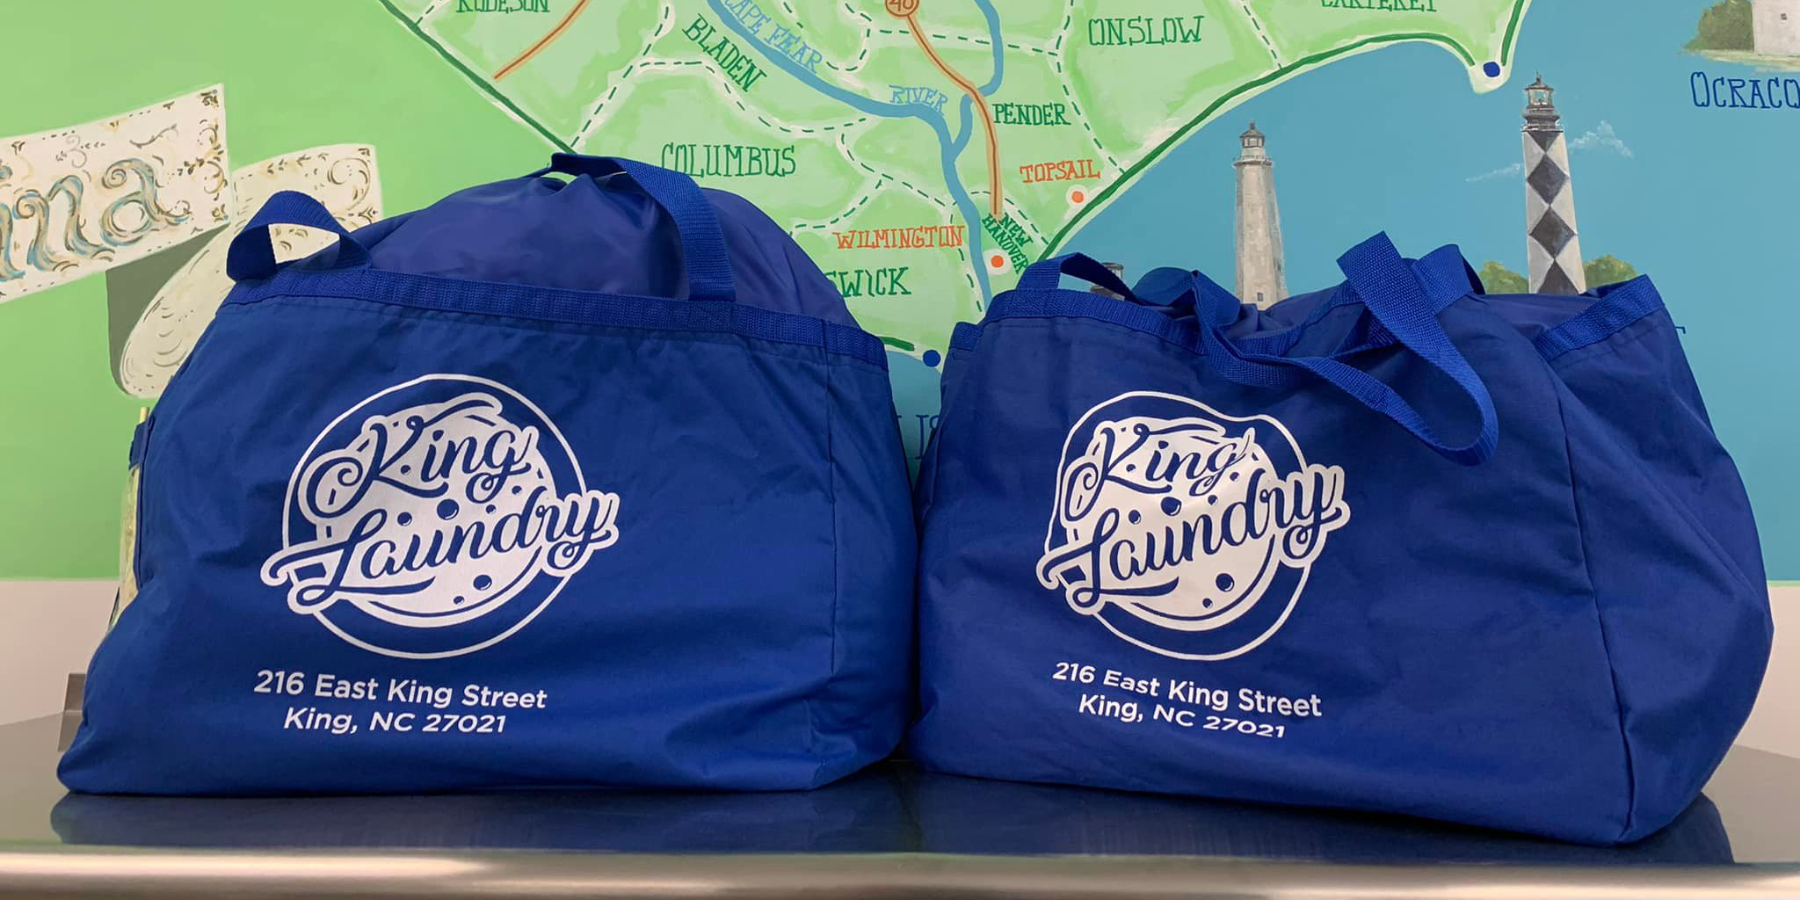 King Laundry oversize tote bags.